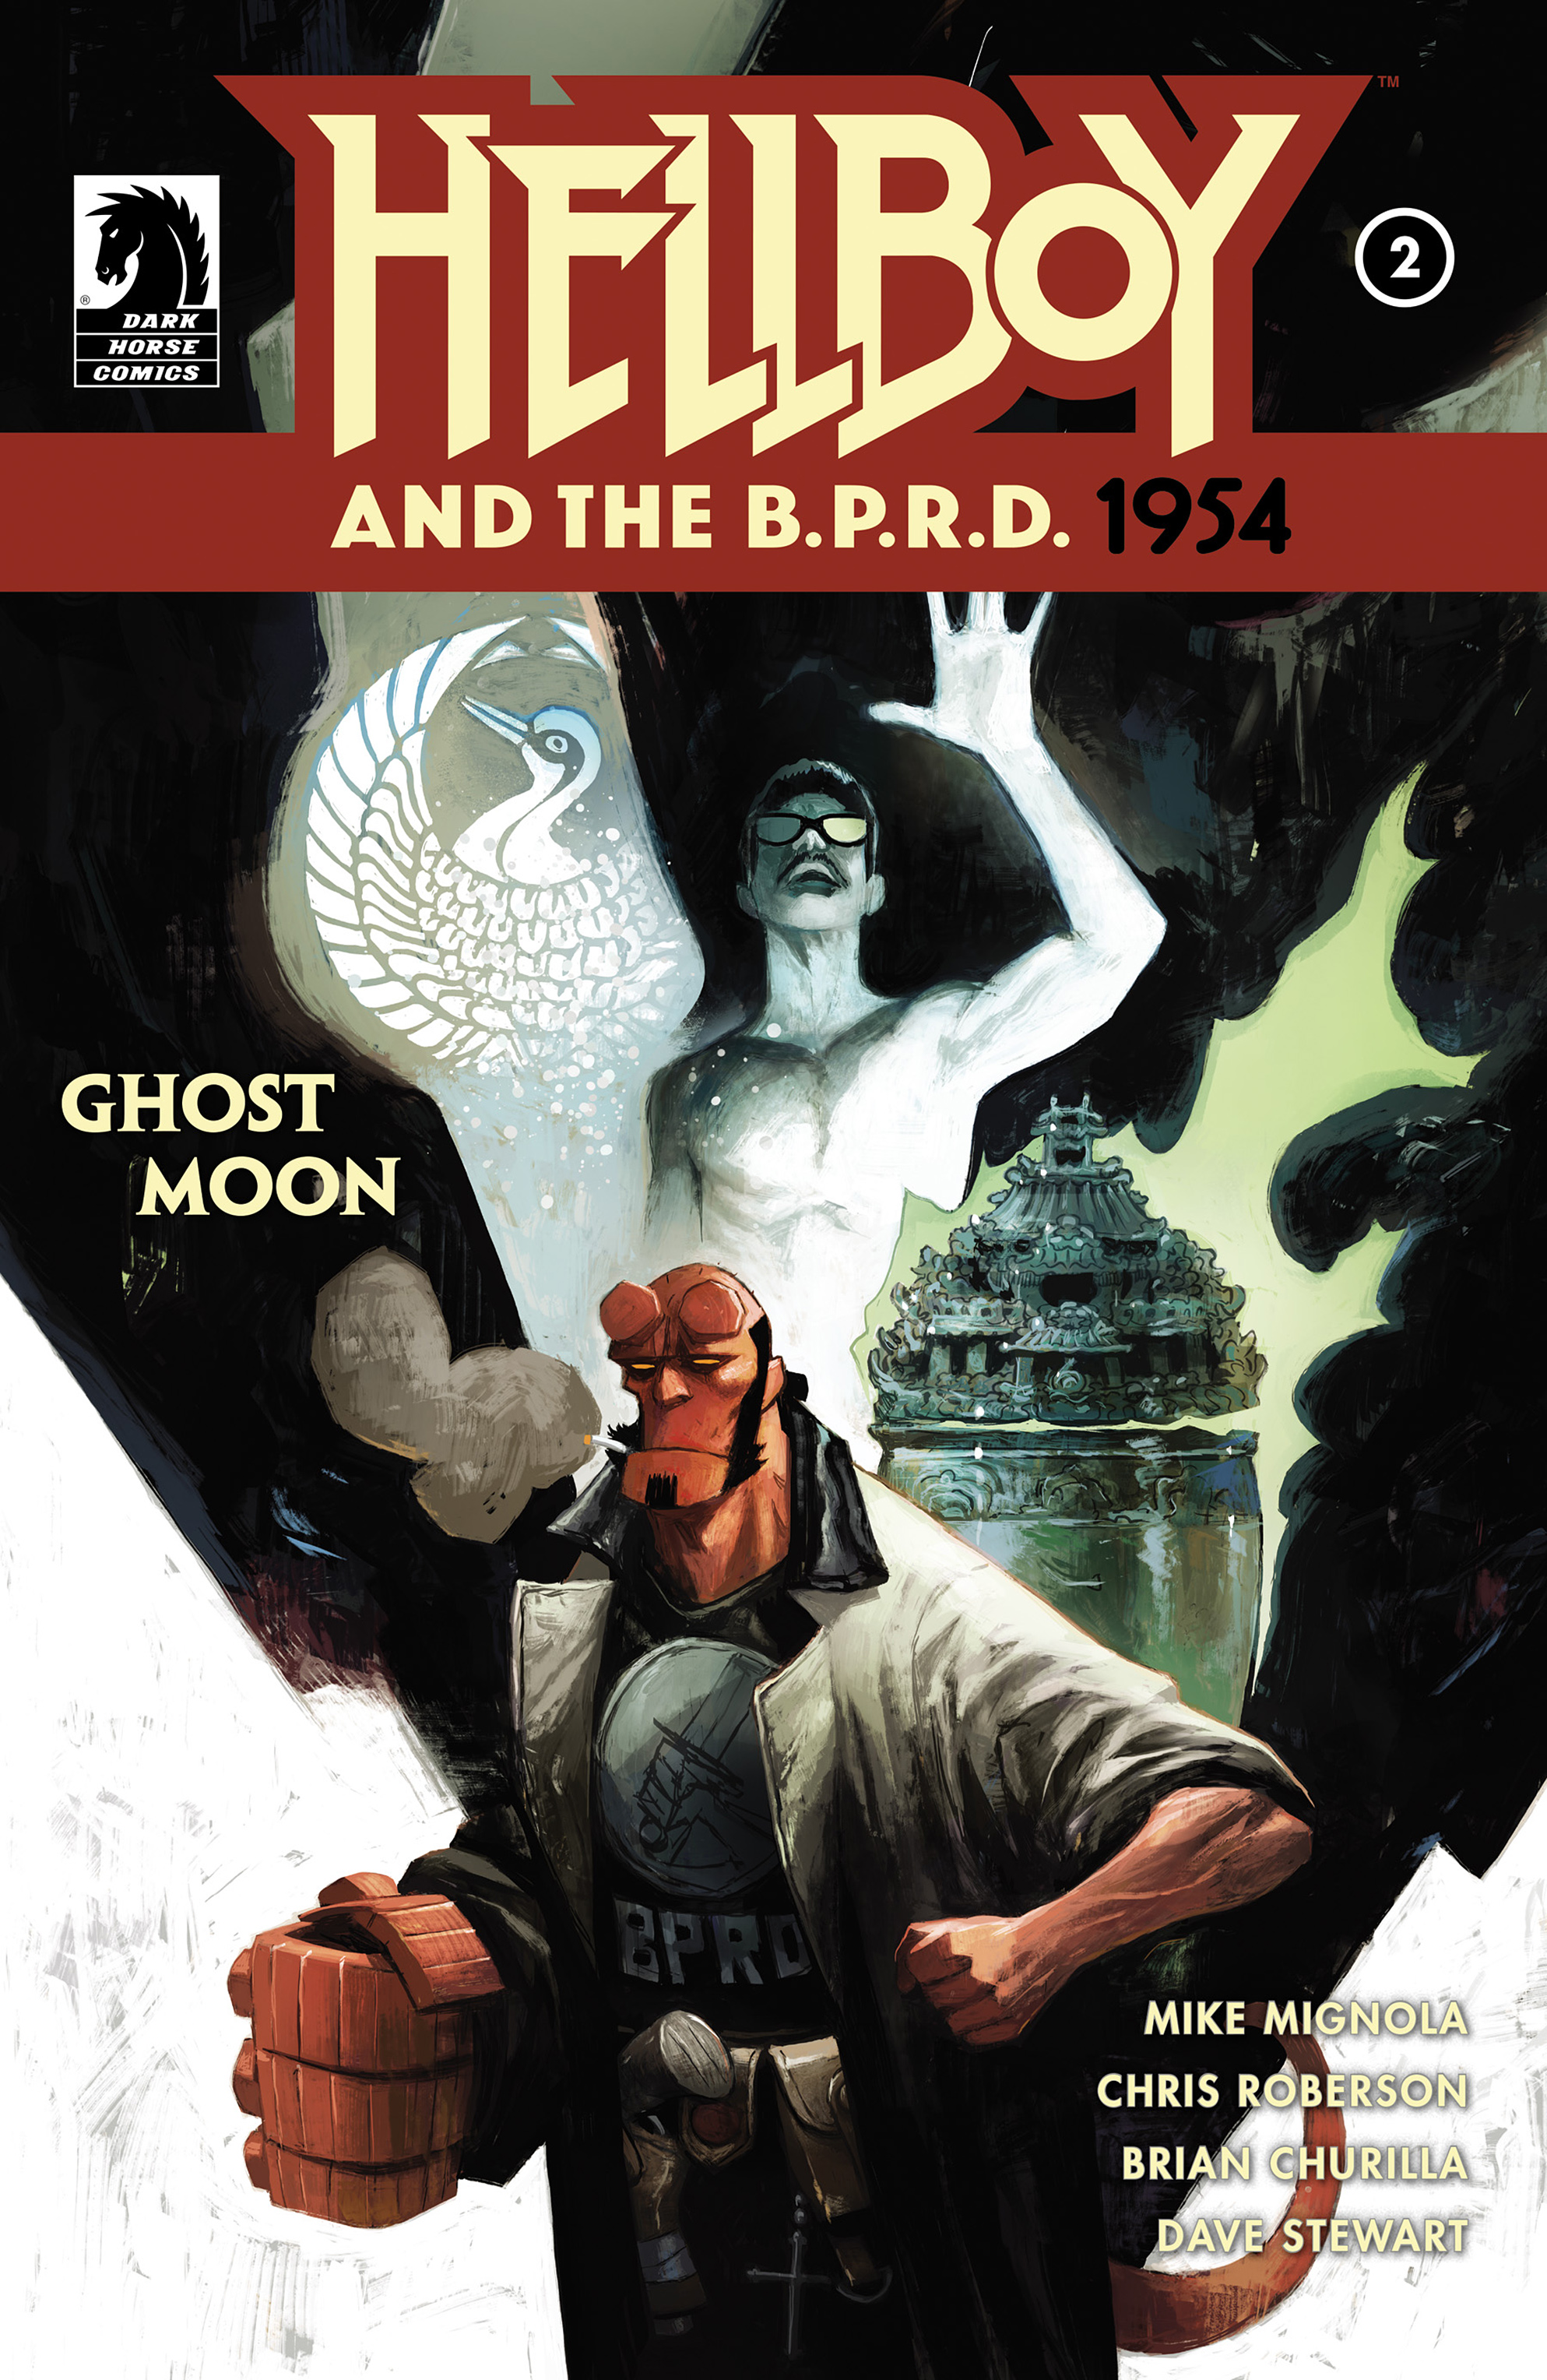 Hellboy and B.P.R.D. 1954 Ghost Moon: Chapter 2 - Page 1